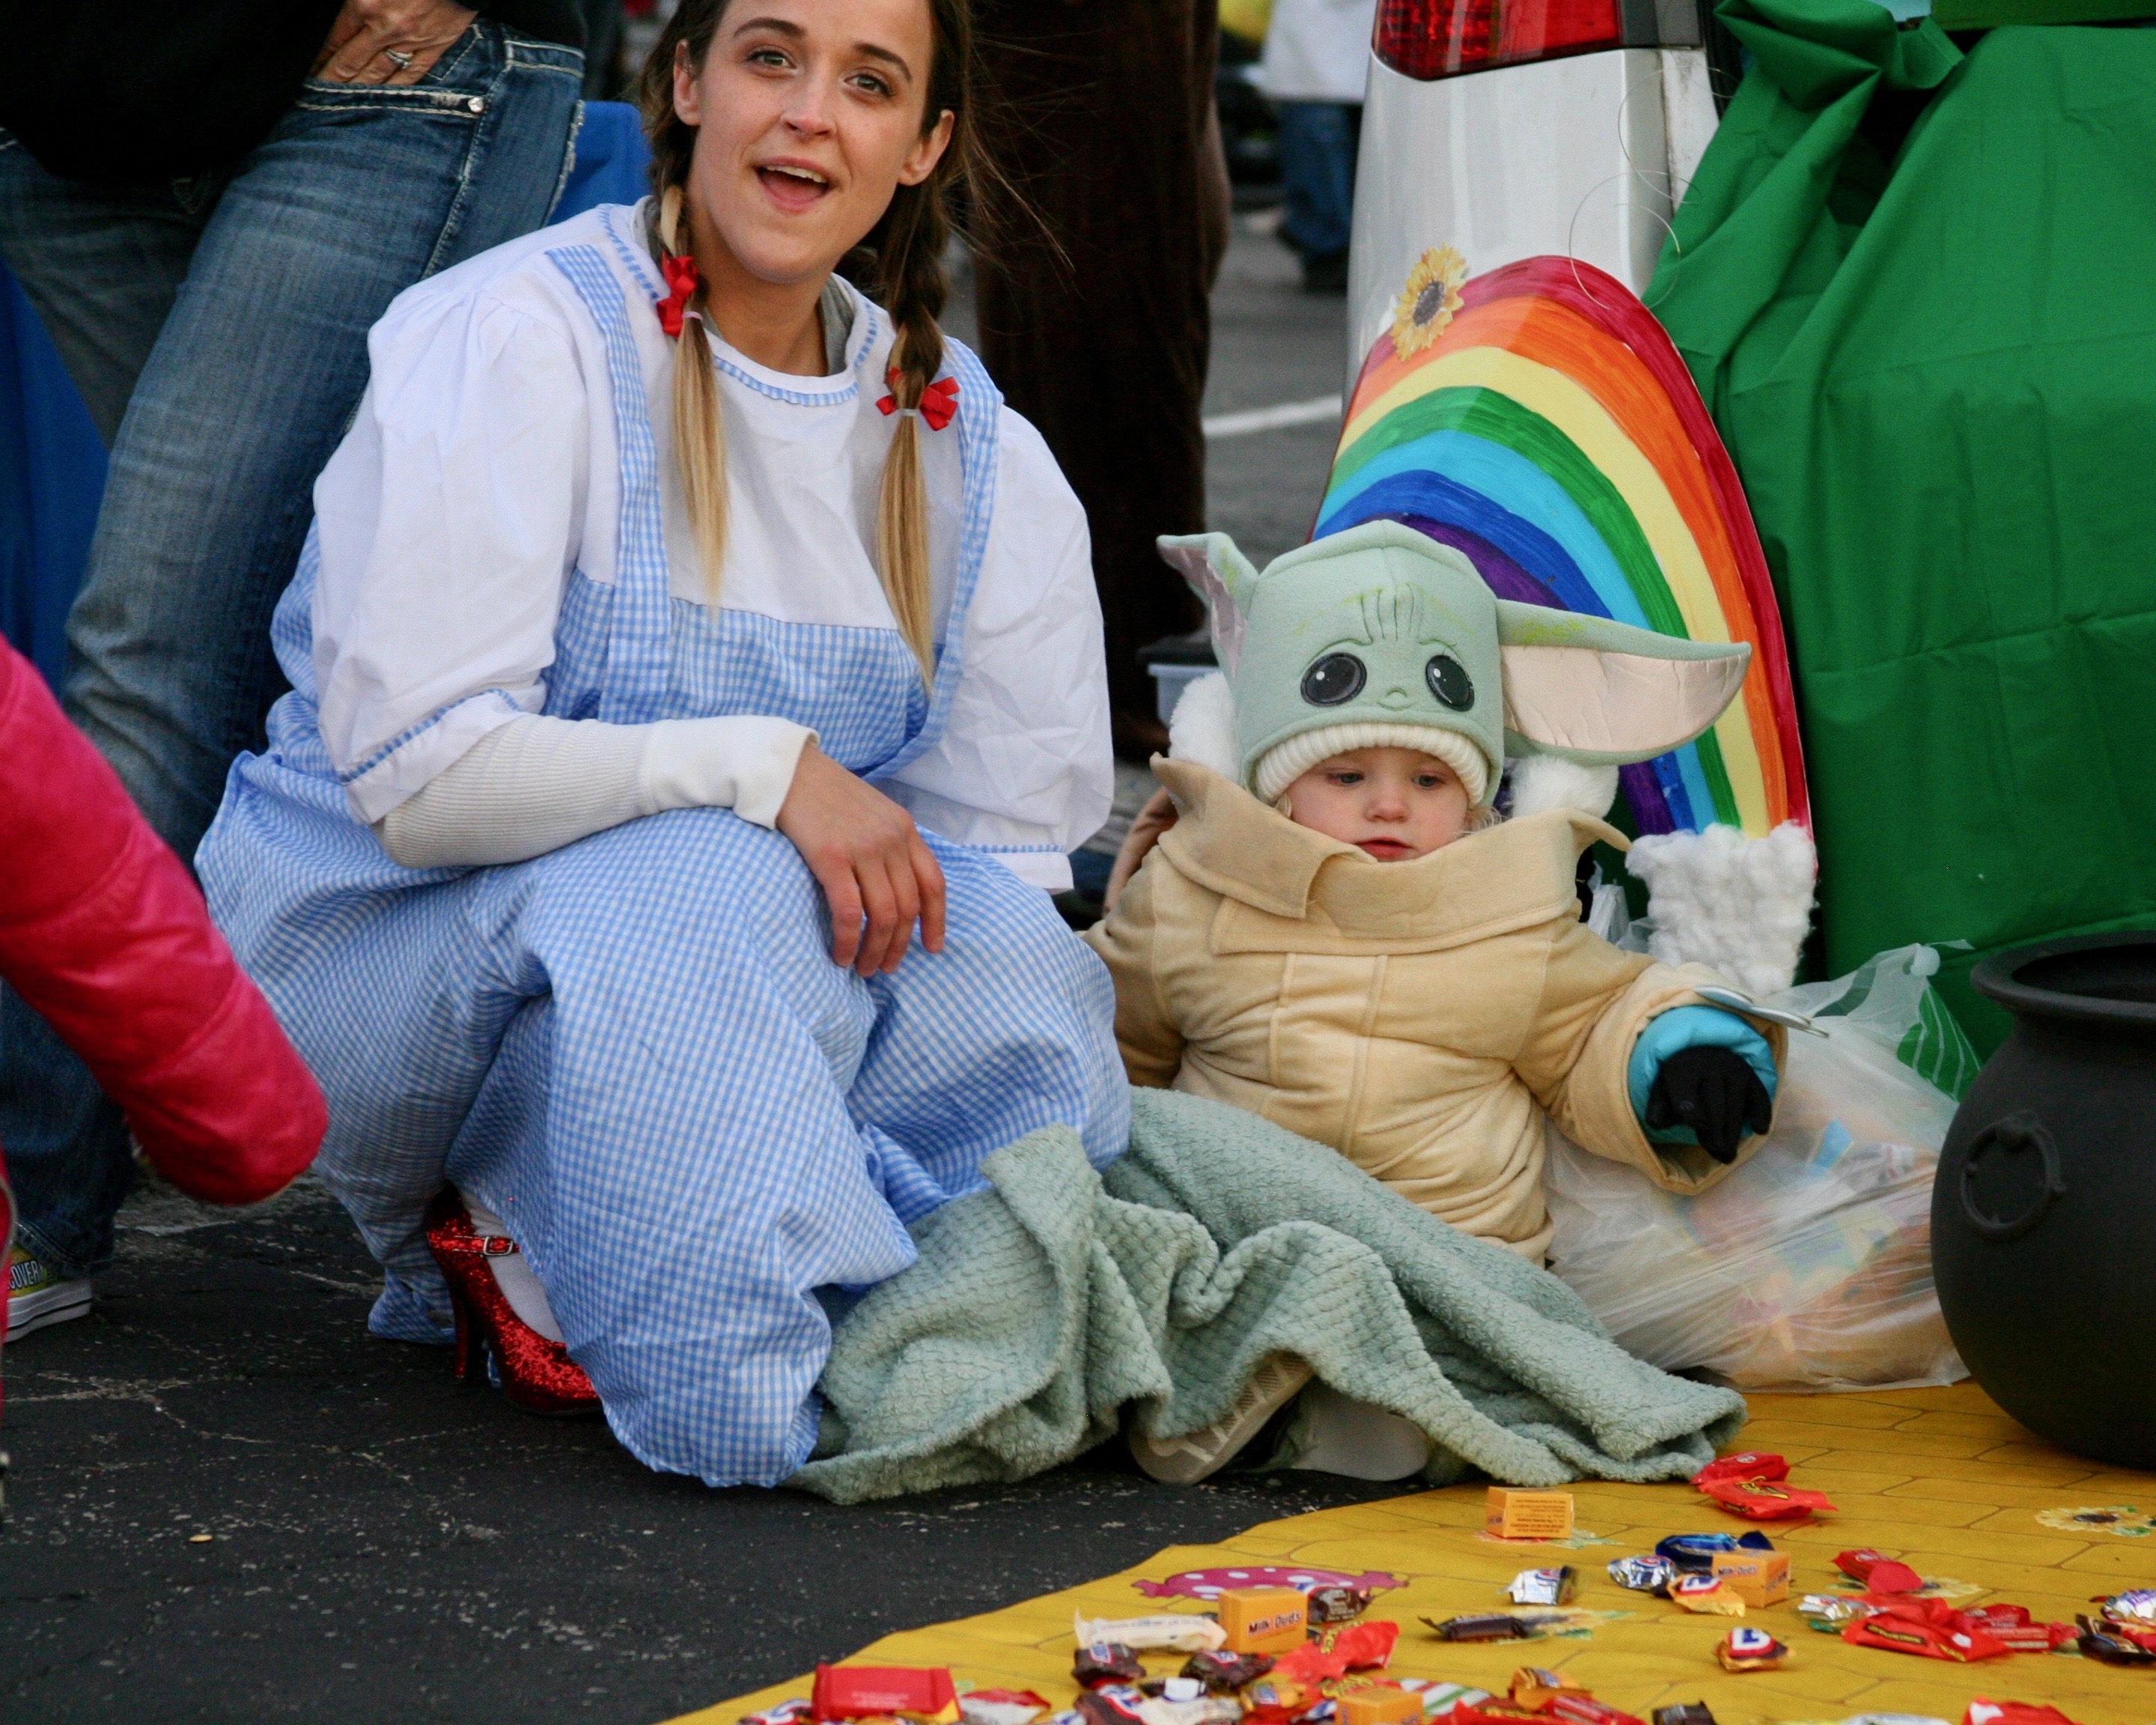 Woman dressed as Dorothy with toddler dressed as Grogu ("baby Yoda")